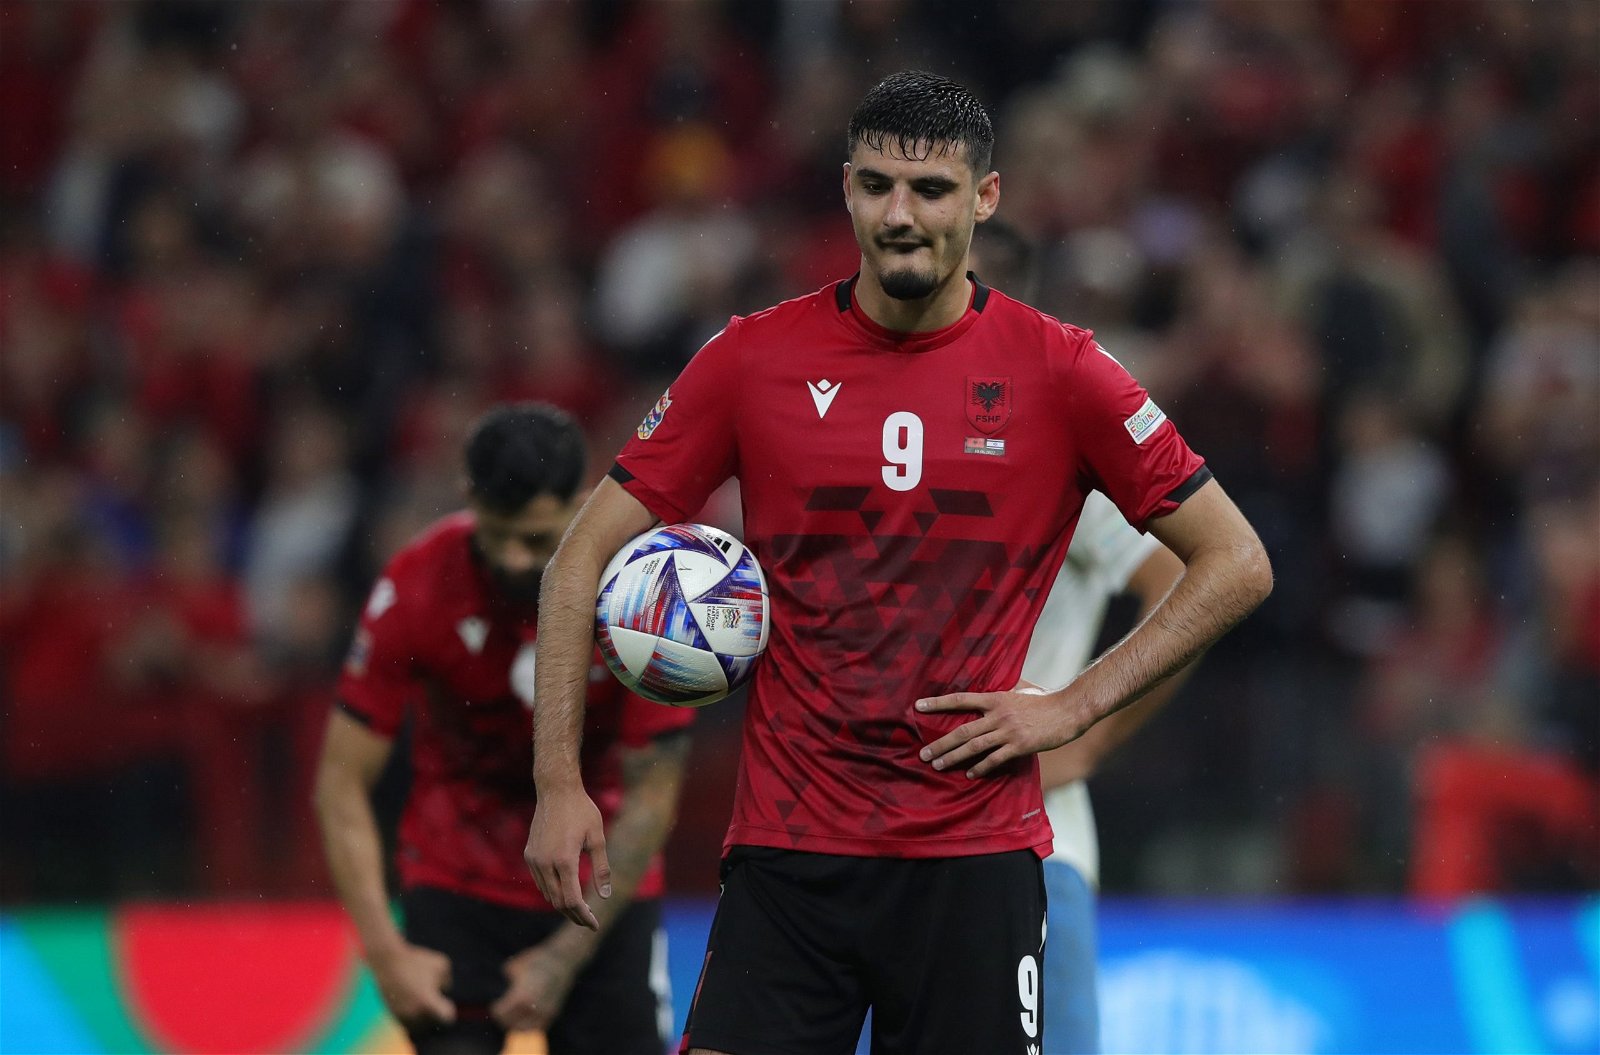  Armando Broja, wearing a red Albania uniform with the number 9, looks on during a soccer match.